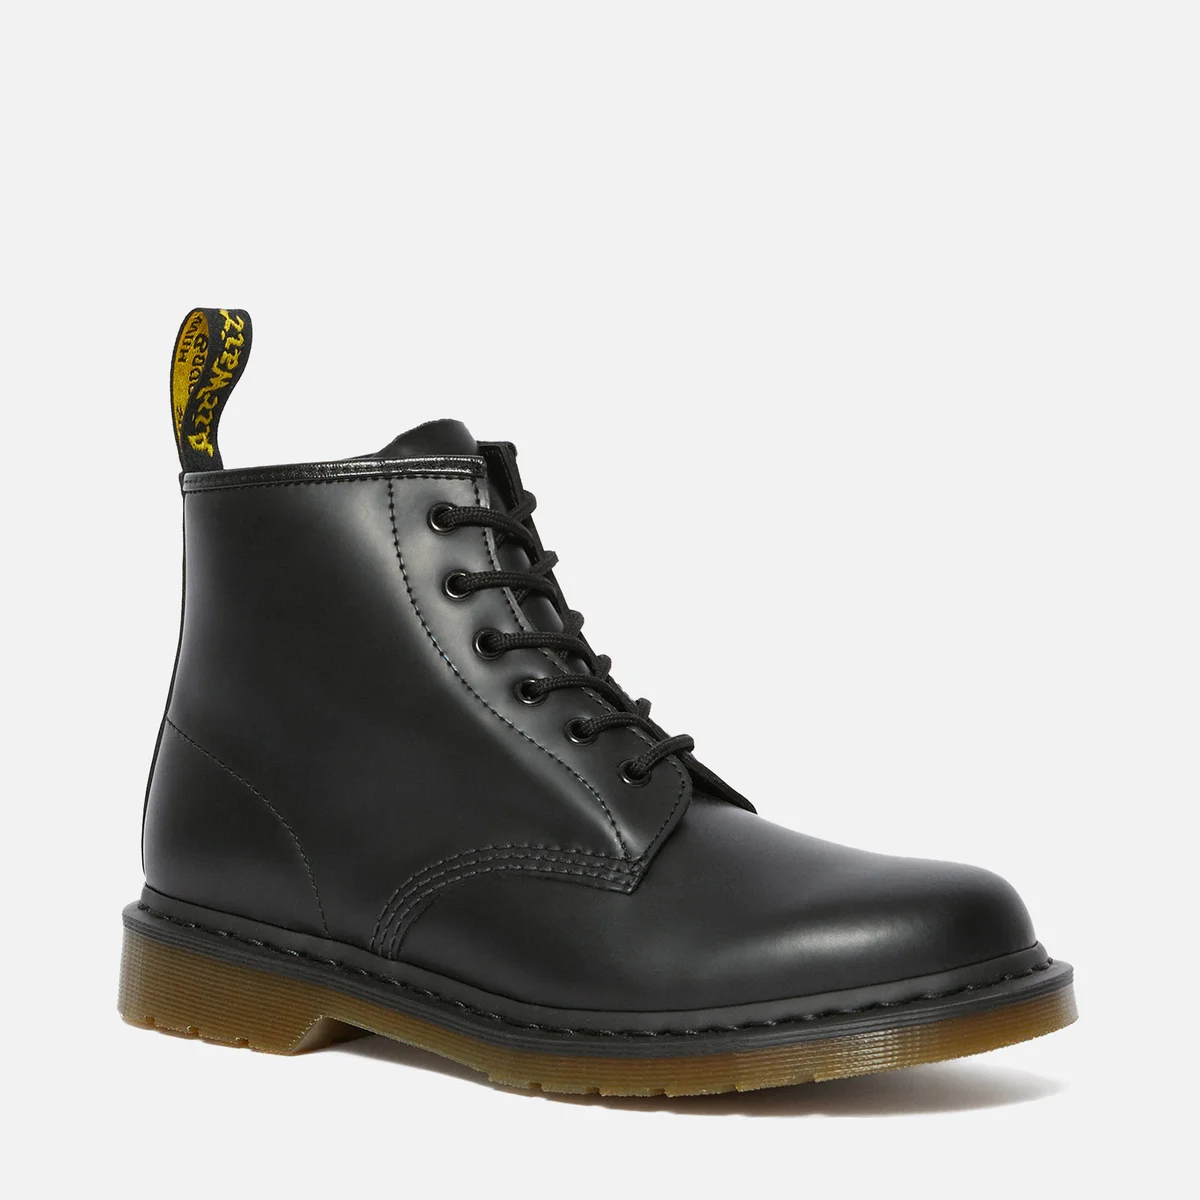 Dr. Martens 101 Smooth Leather 6-Eye Boots - Black Image 1